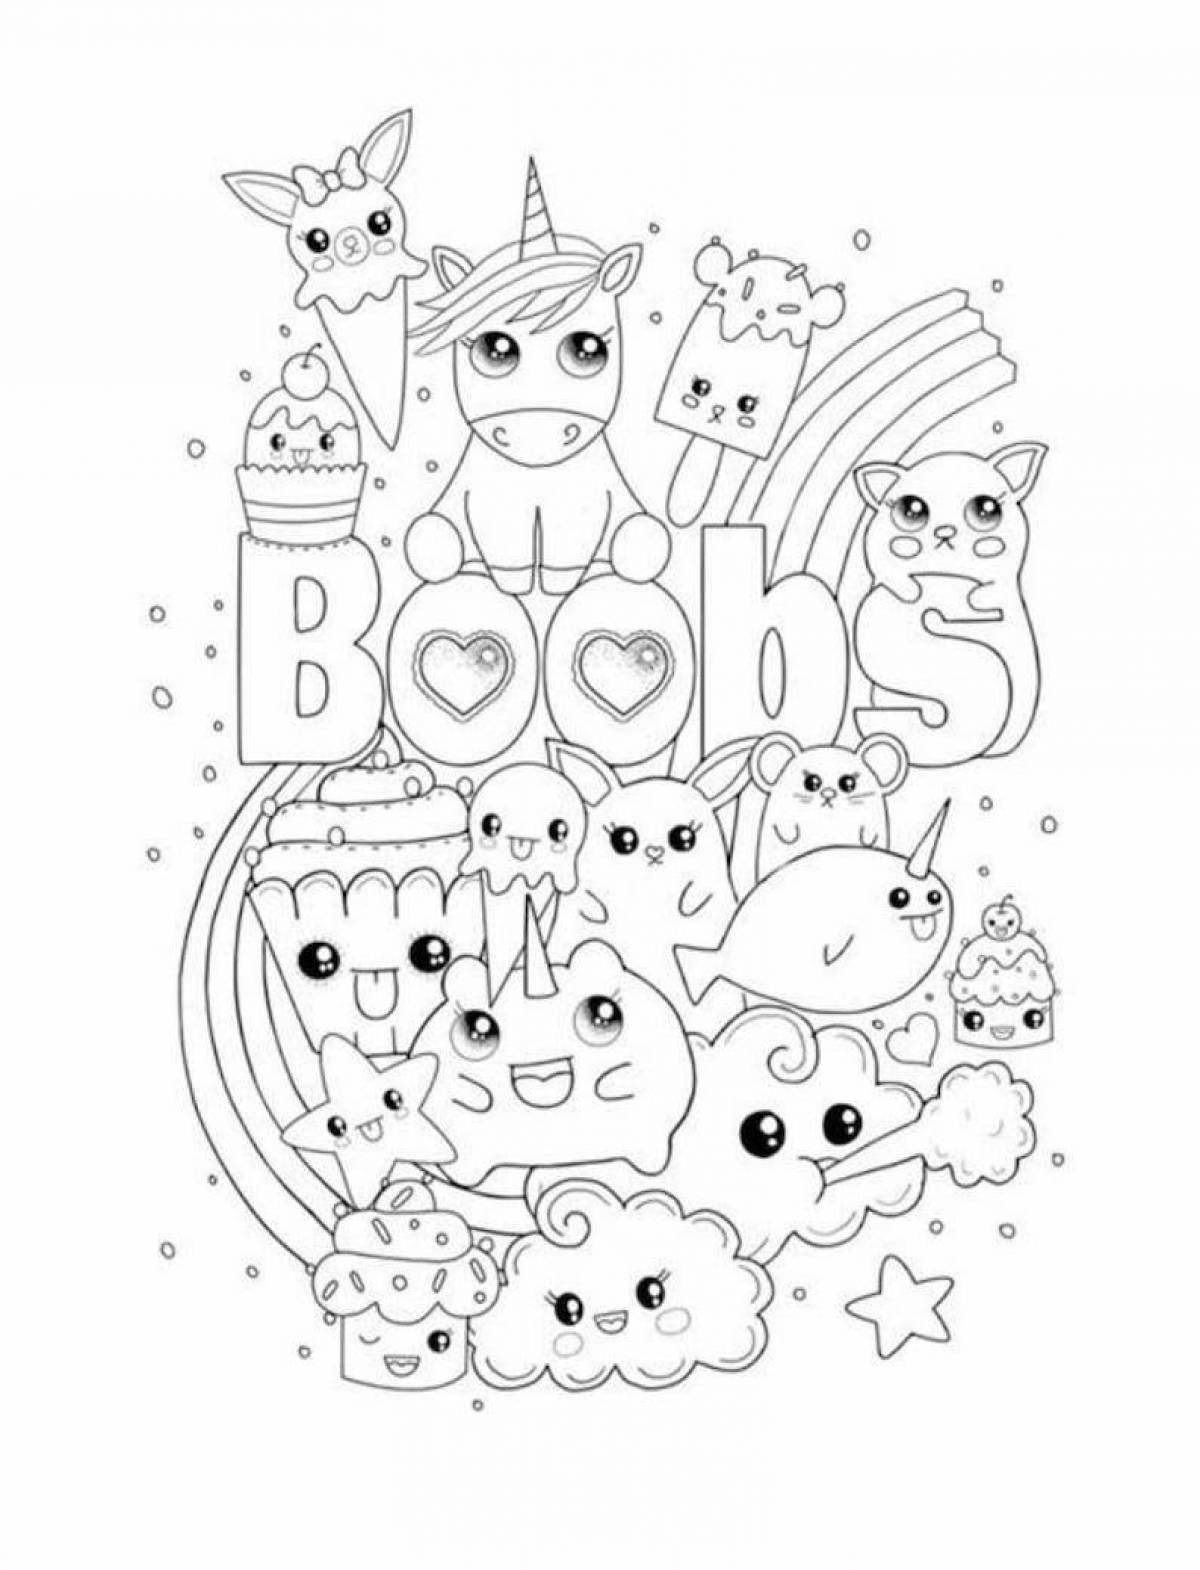 Joyful unicorn coloring pages for girls